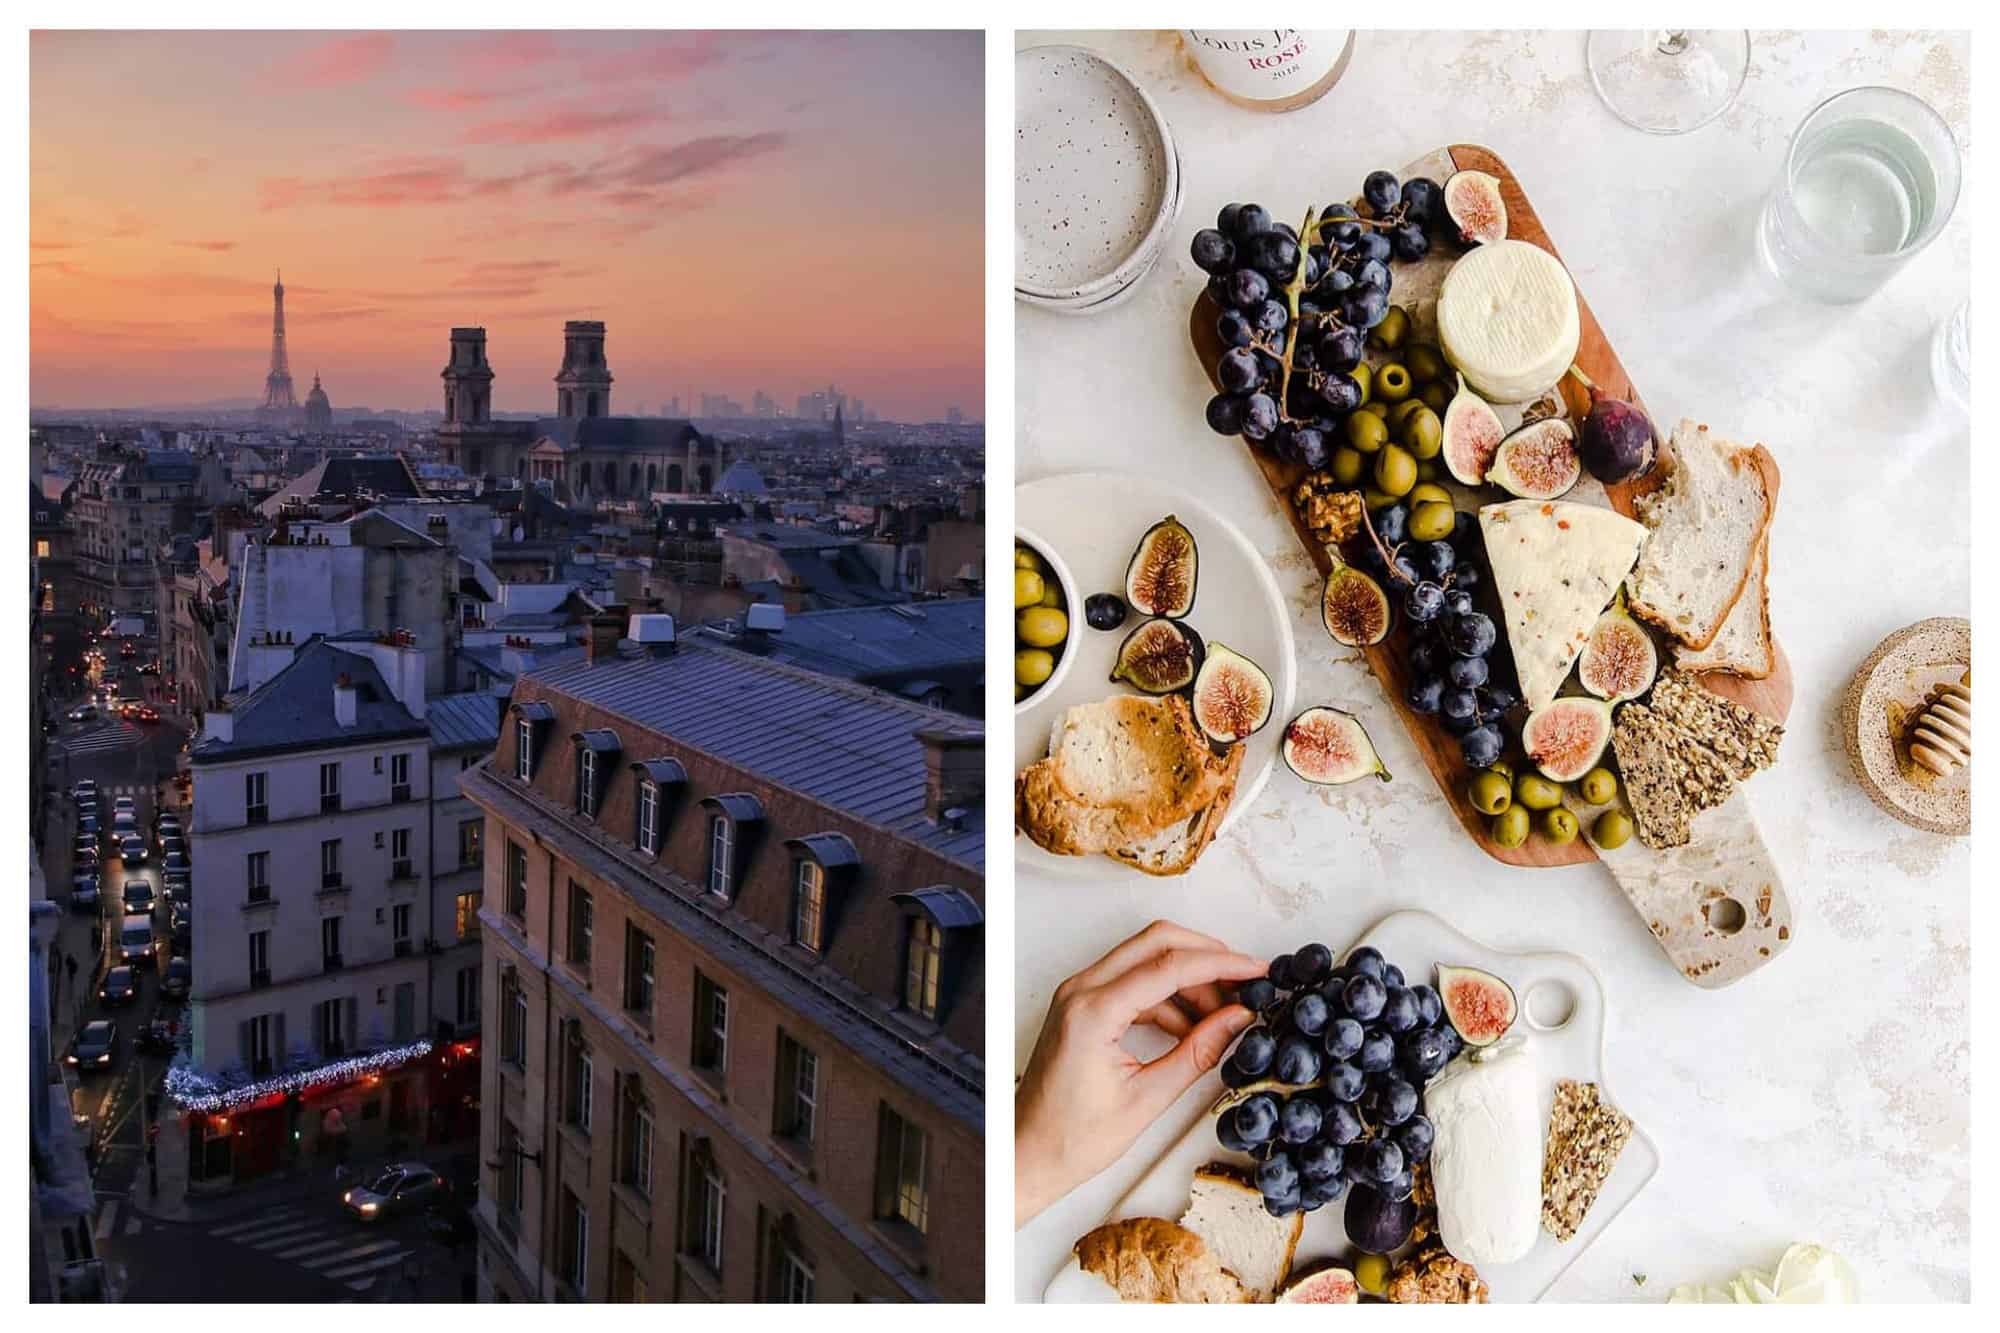 Left: a view of Paris. There are several buildings and the Eiffel Tower can be seen in the distance. The sun is setting and the sky is pink and orange. There are Christmas decorations visible on a café on a street below. Right: an aerial view of a cheese platter. There are several pieces of cheese as well as grapes, figs, and olives. There is also bread. To the left is a smaller cheese platter and a plate, both filled with cheese and fruit. 